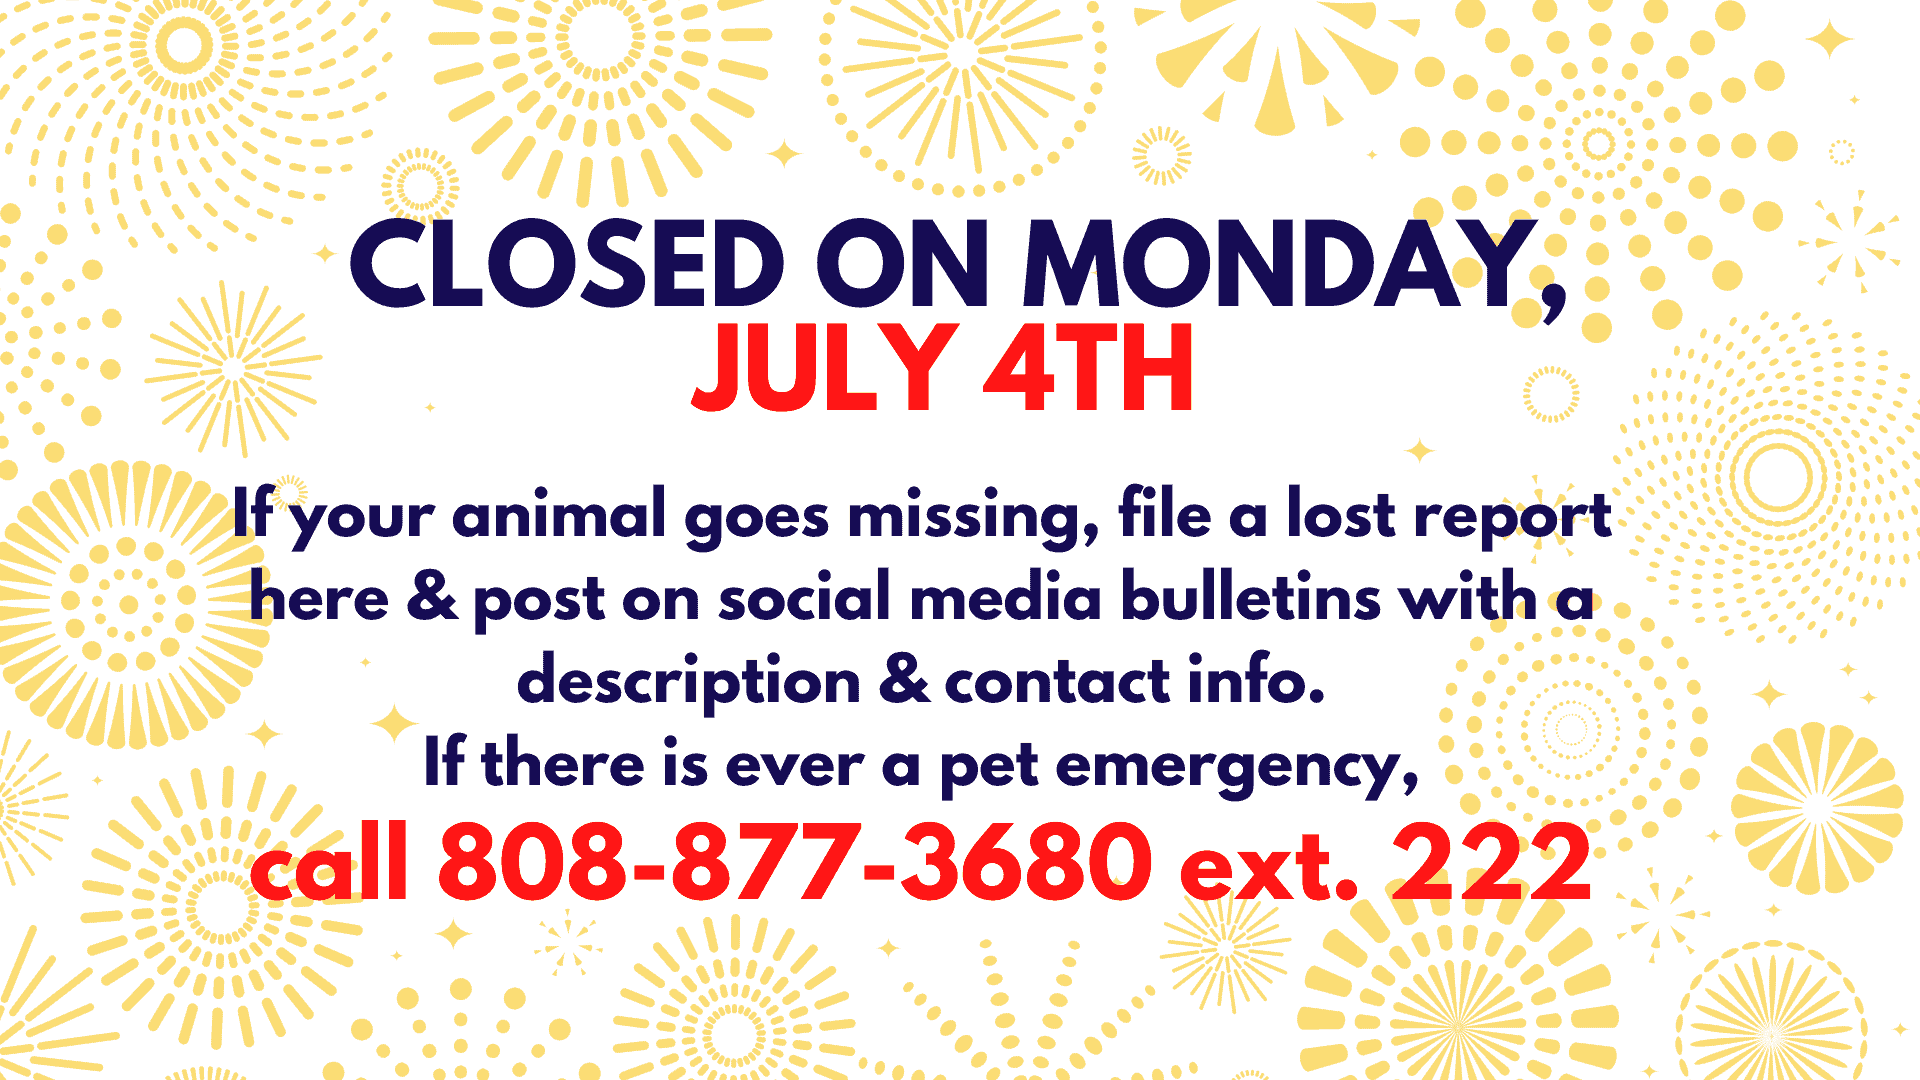 July 4th - We are closed on Monday, July 4th. For Animal Emergencies call 808-877-3680 ext. 222